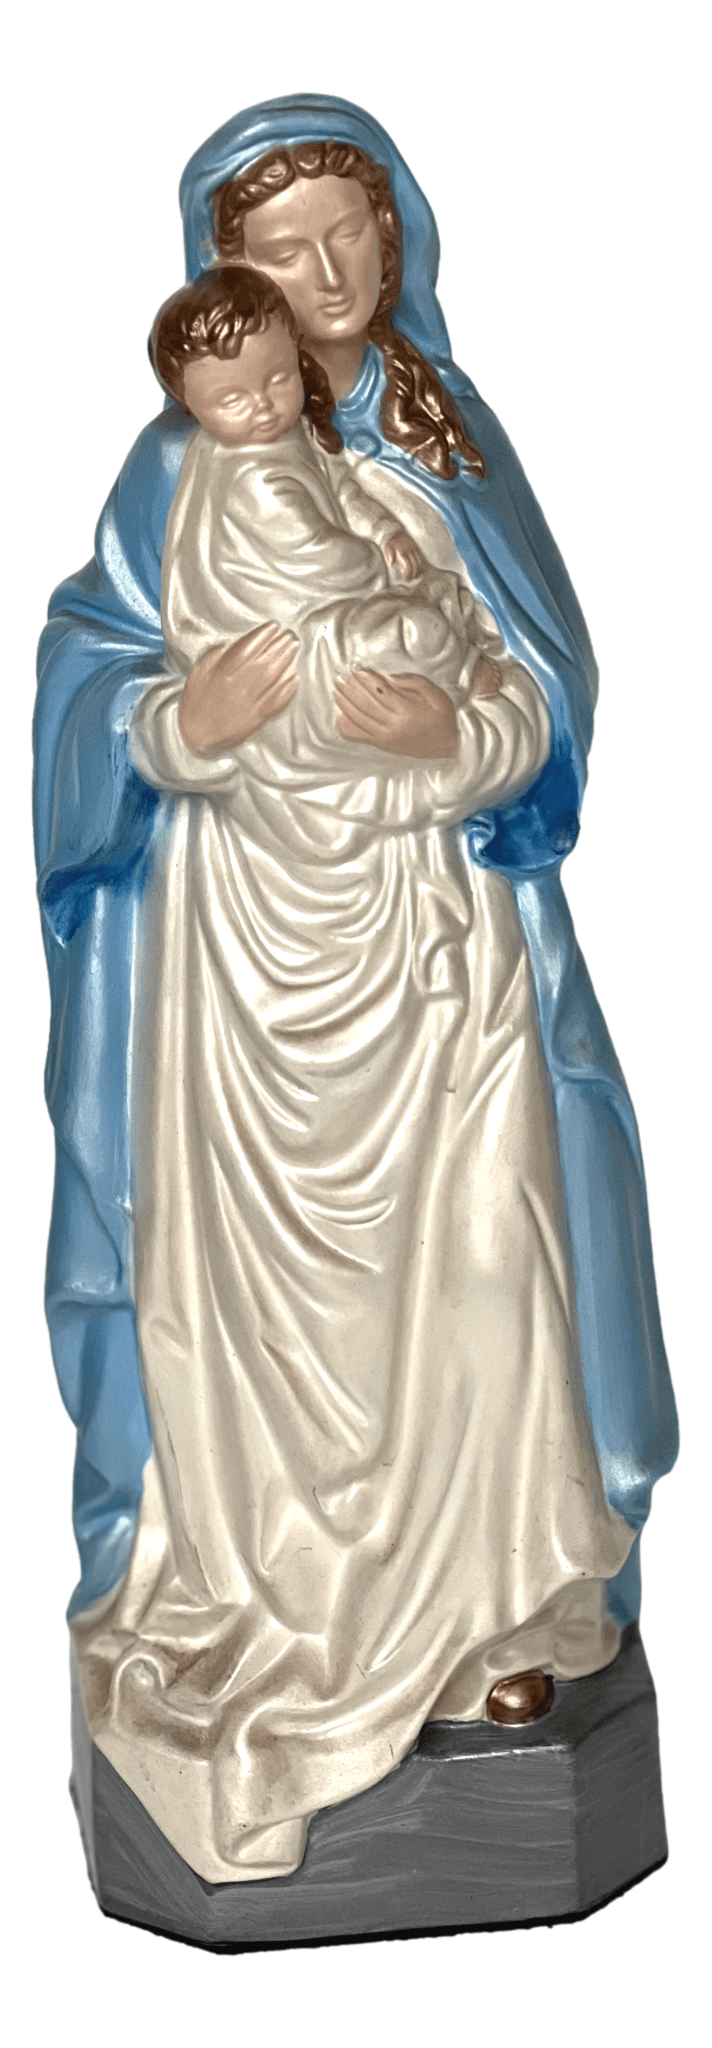 Statue Ceramic Madonna And Child Handpainted Locally H: 13 inches X W: 4 inches - Ysleta Mission Gift Shop- VOTED 2022 El Paso's Best Gift Shop